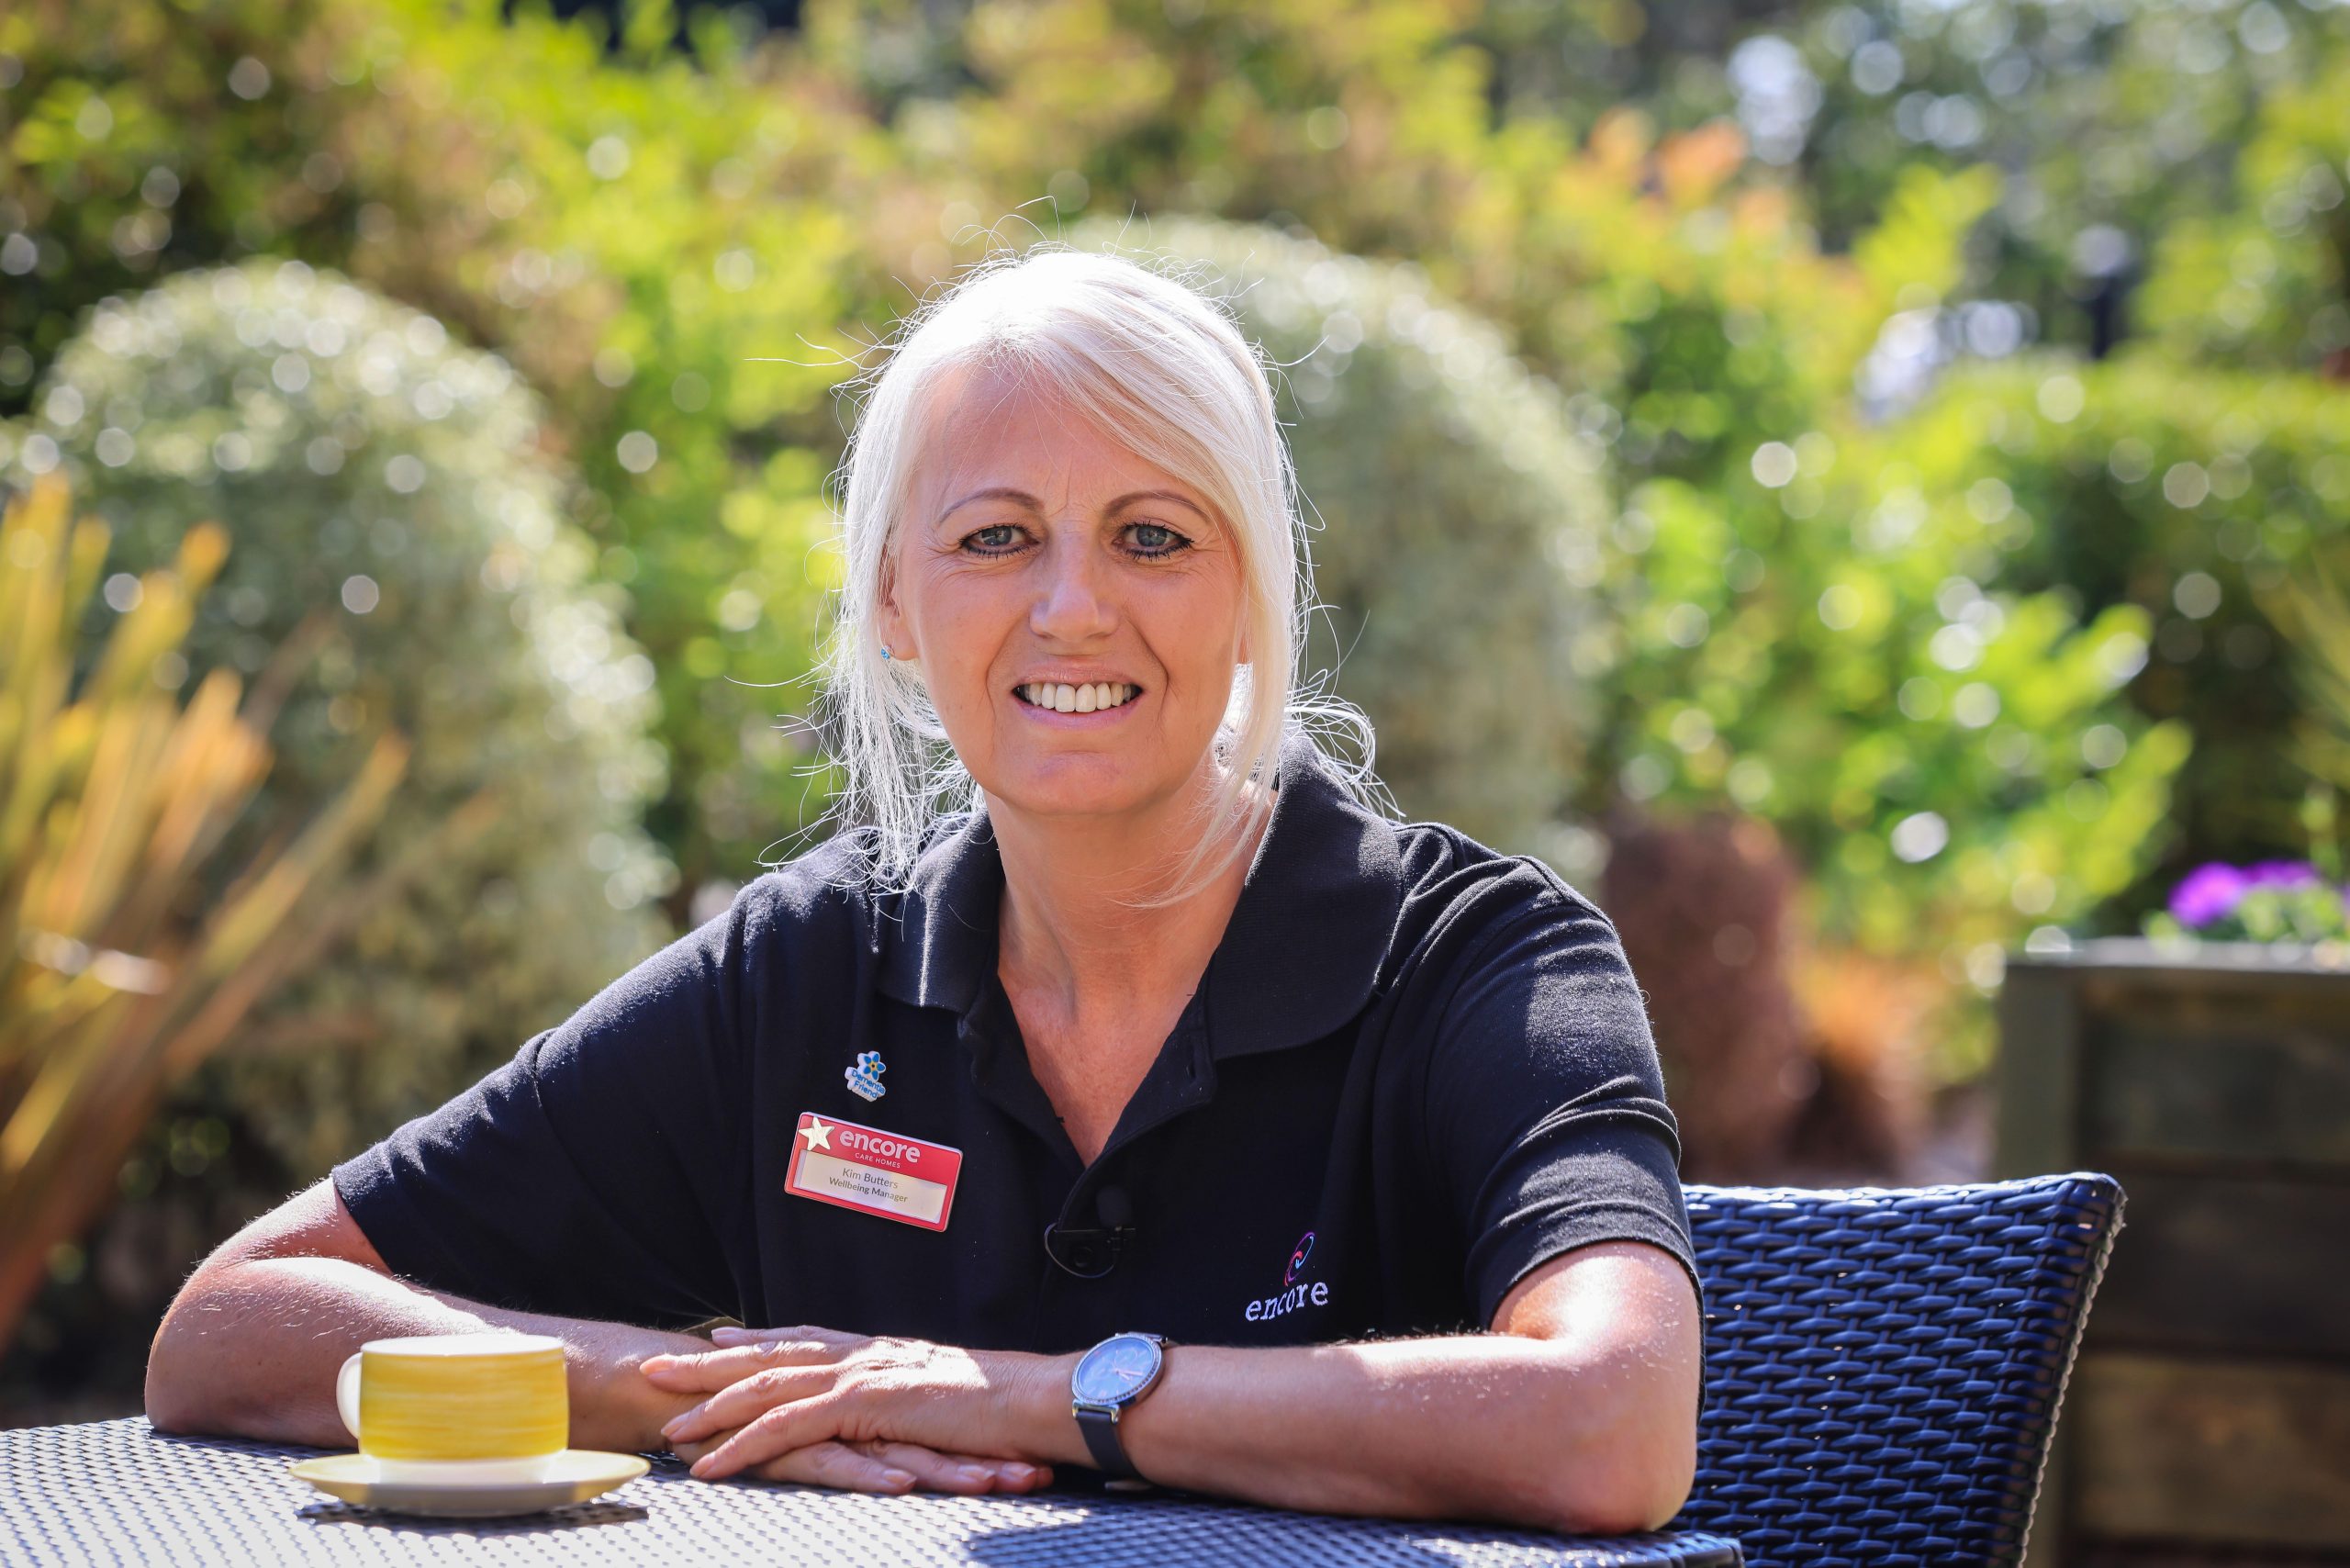 Fairmile Grange wellbeing manager smiling outdoors